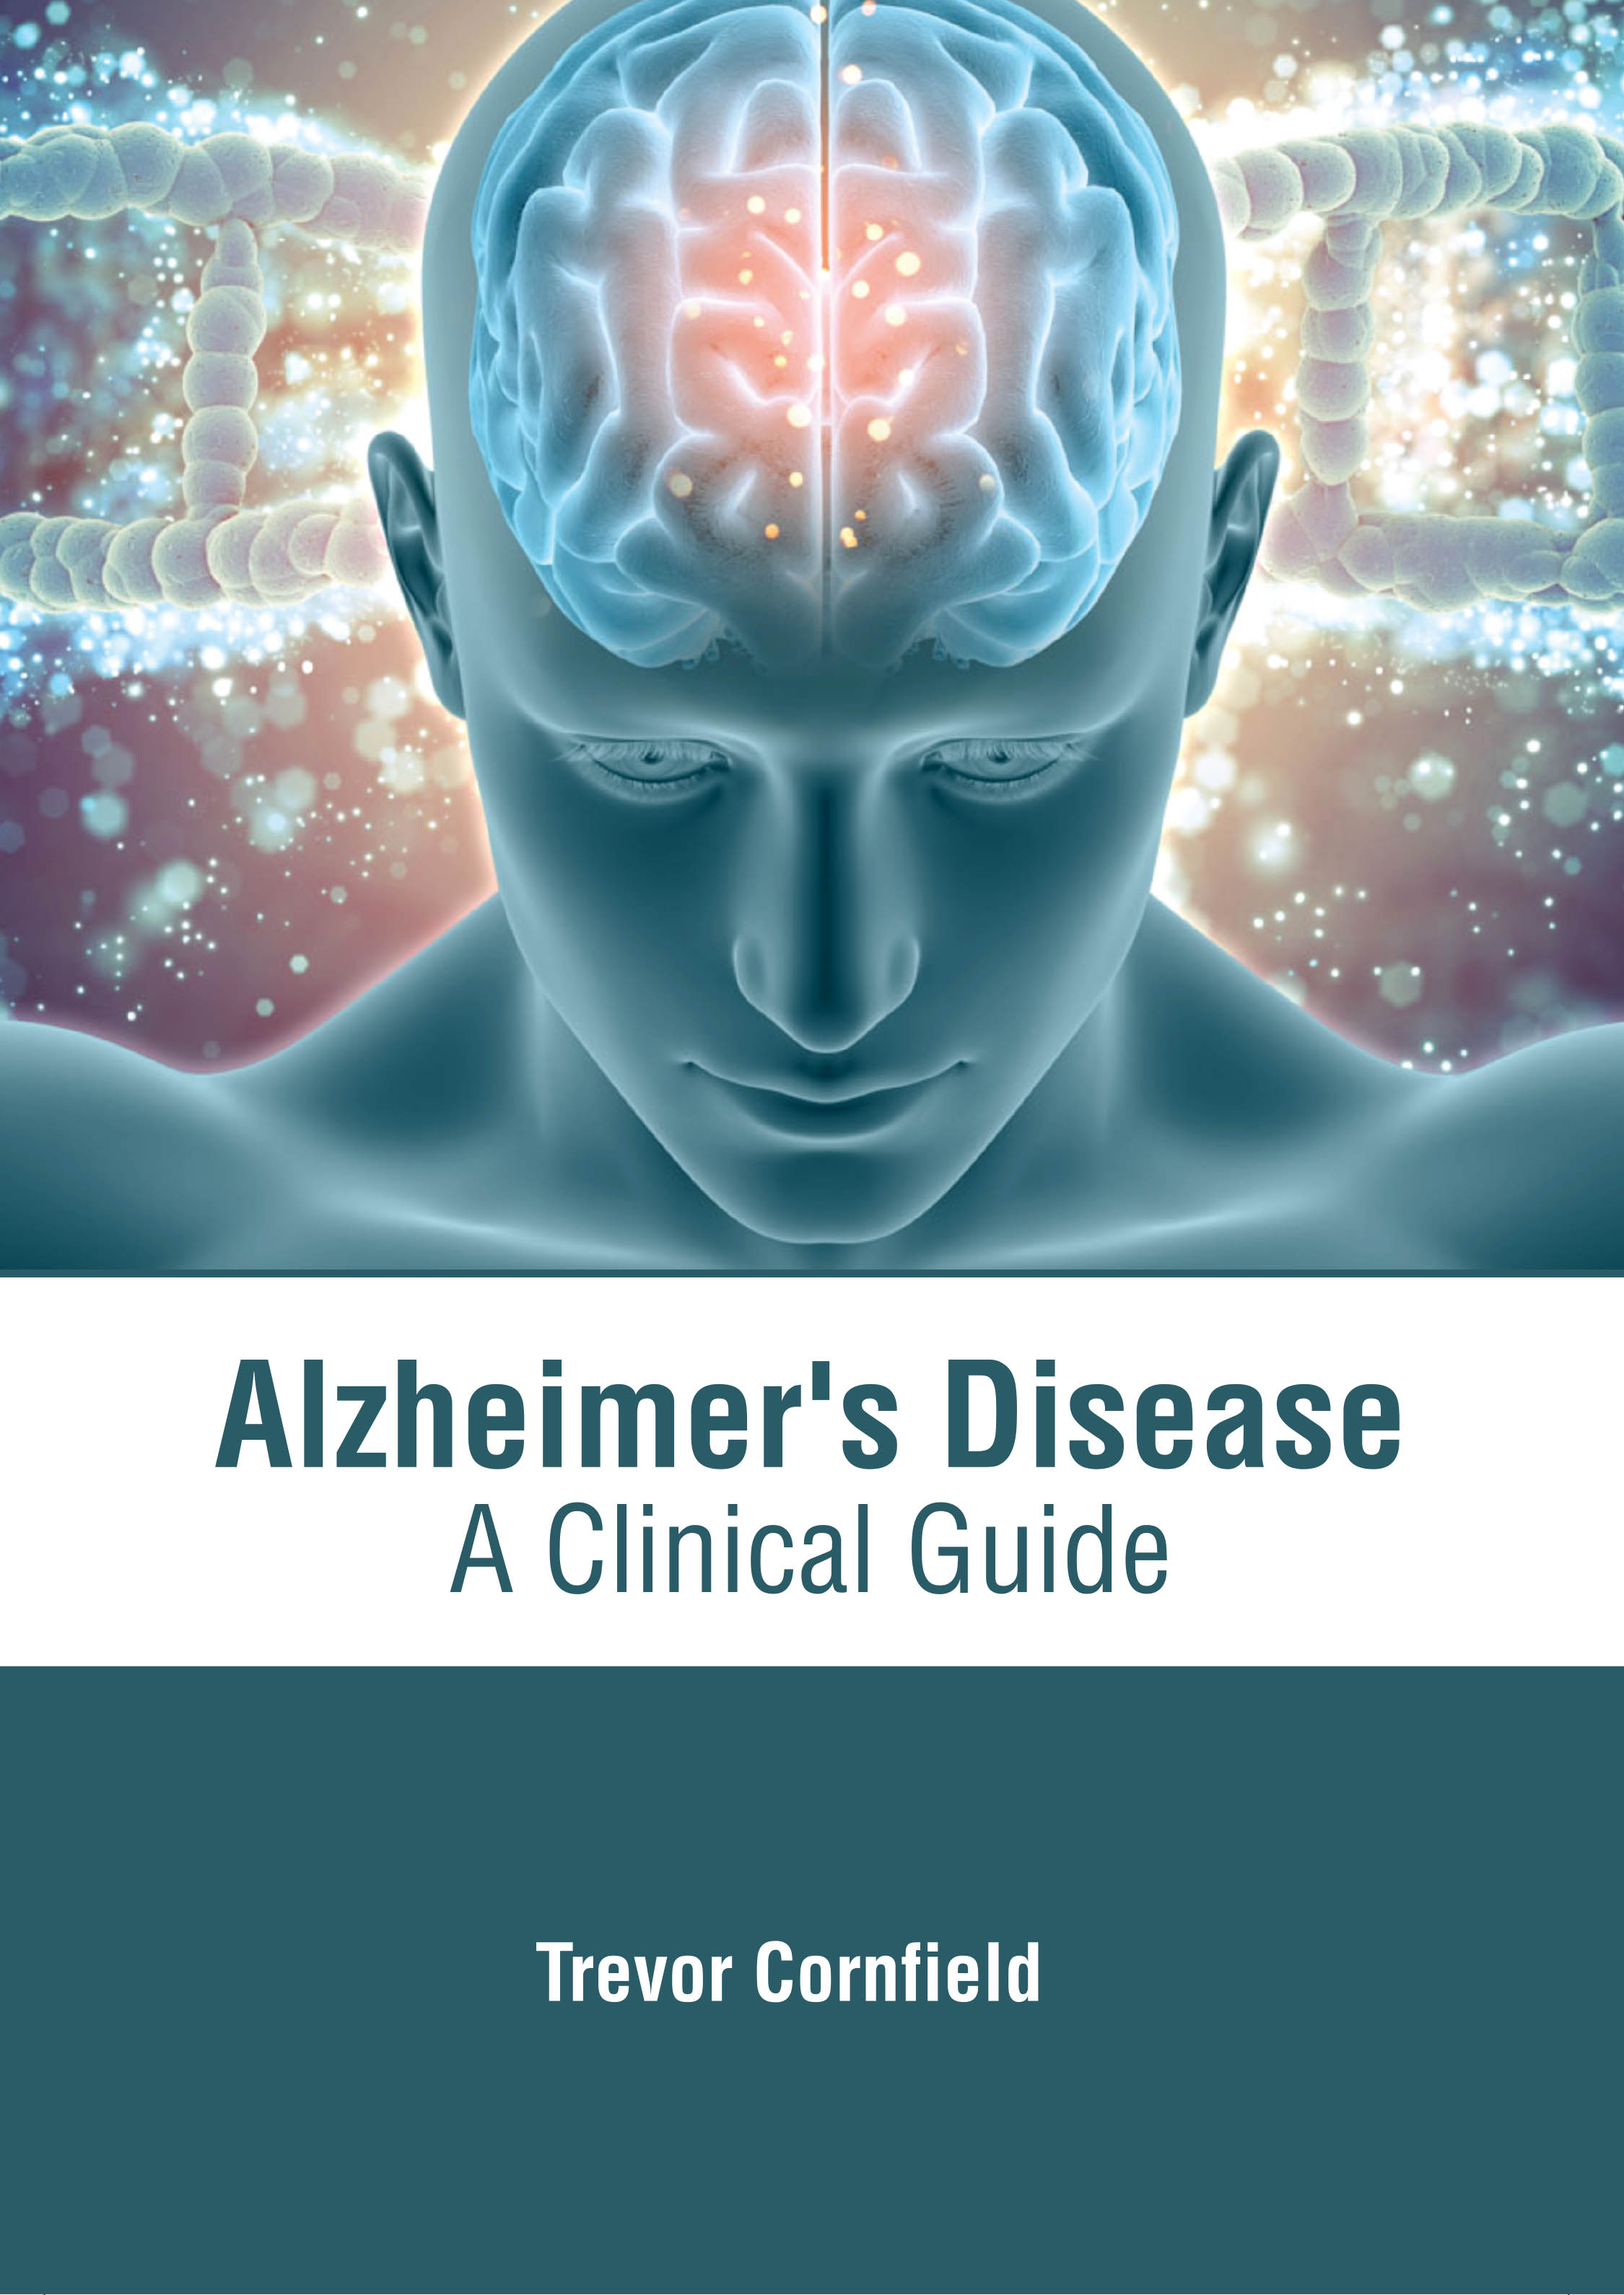 

exclusive-publishers/american-medical-publishers/alzheimer-s-disease-a-clinical-guide-9781639274352